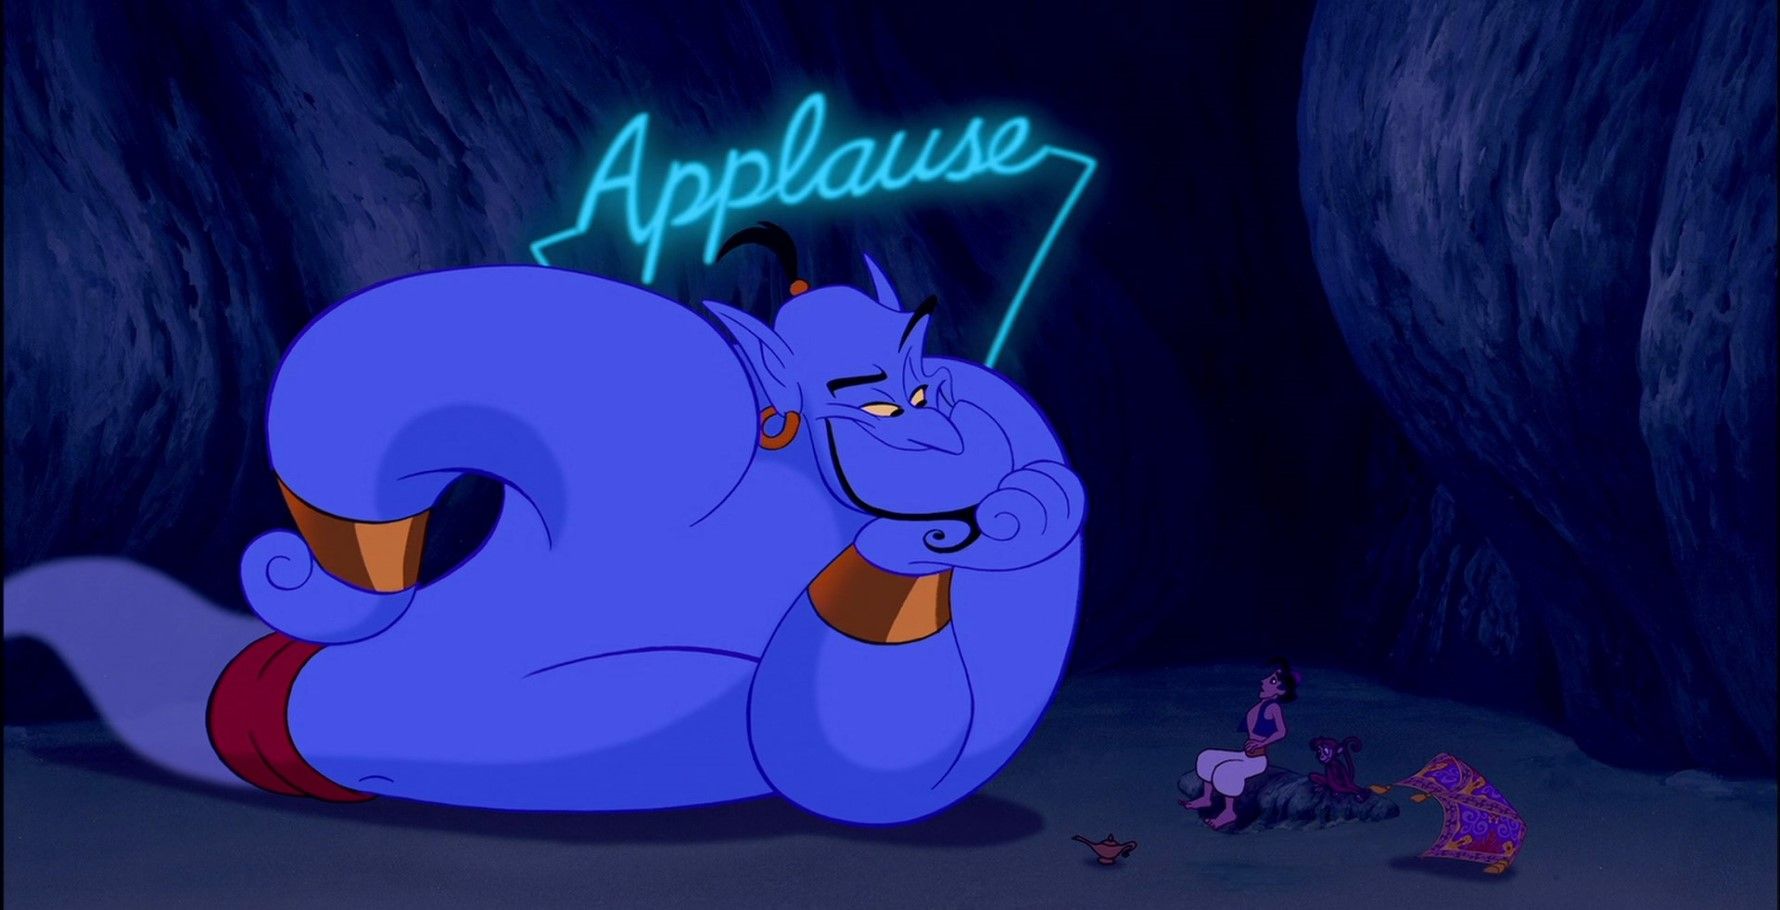 20 facts you might not know about 'Aladdin